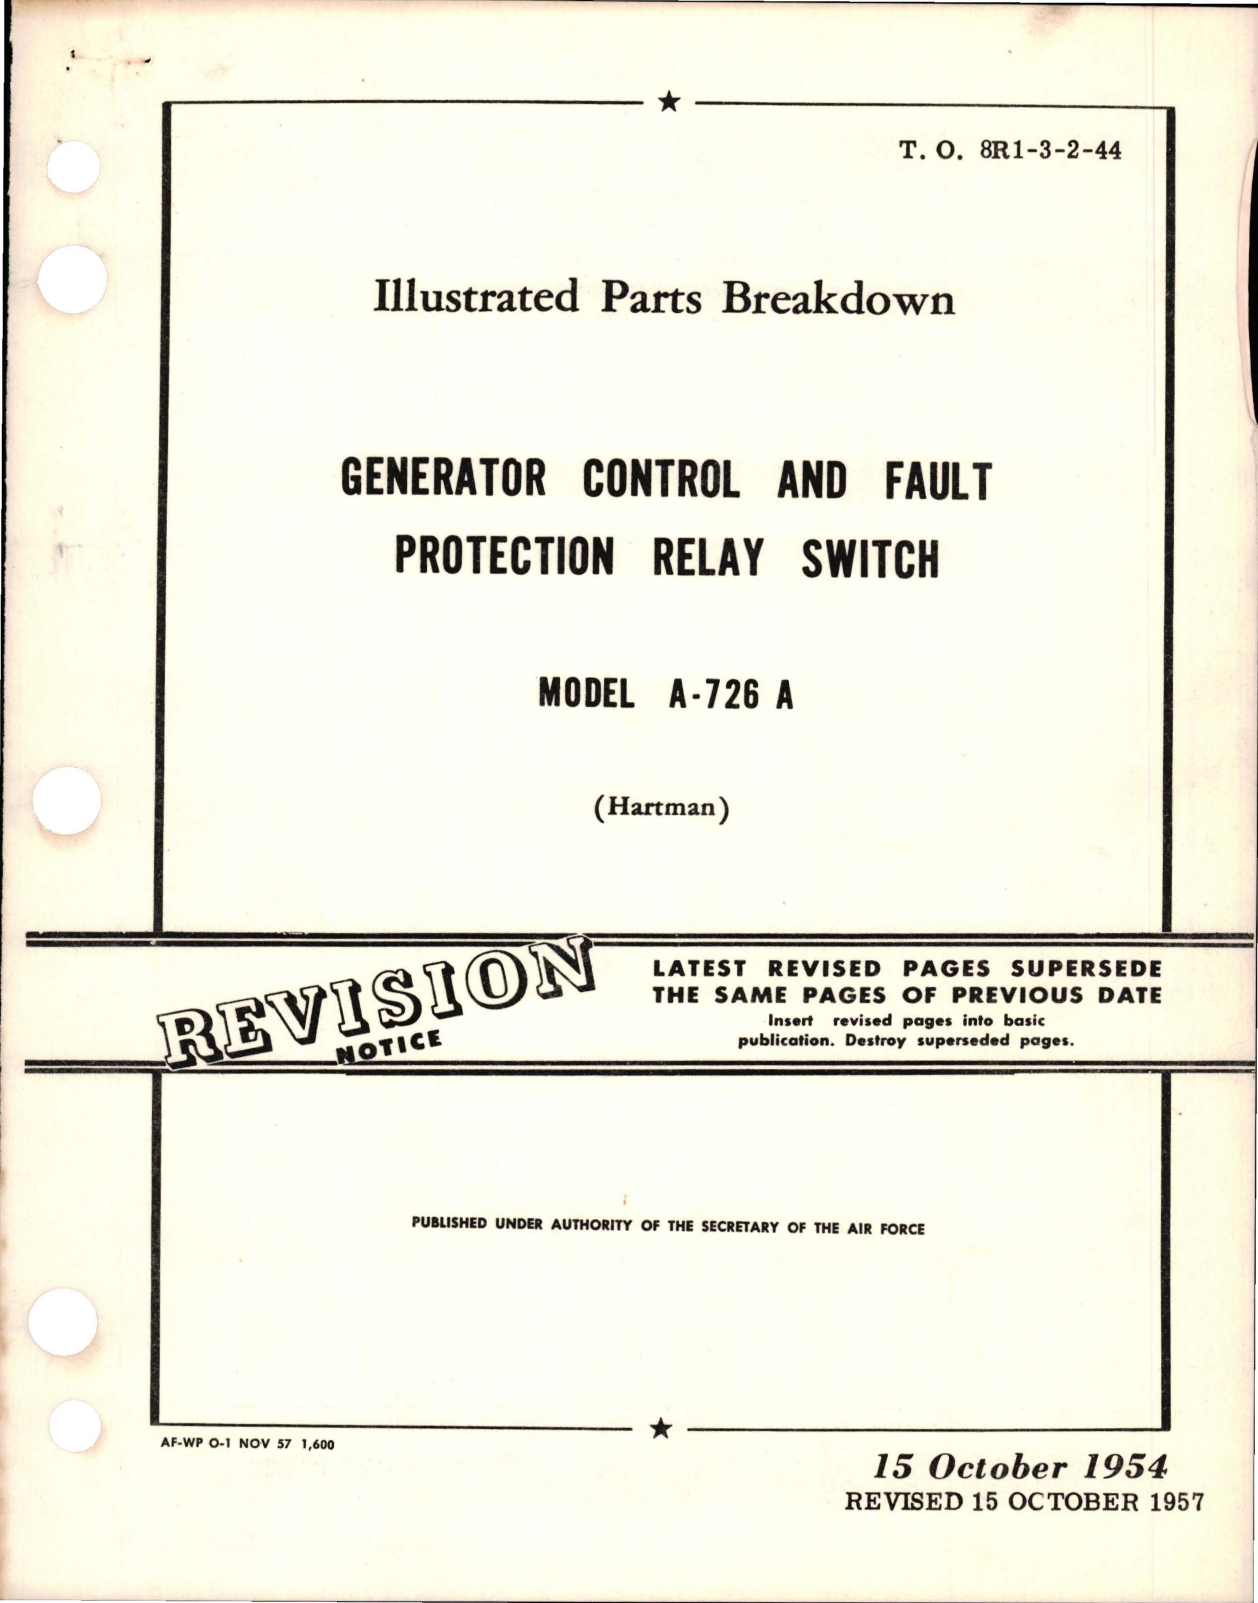 Sample page 1 from AirCorps Library document: Illustrated Parts Breakdown for Generator Control & Fault Protection Relay Switch - Model A-726 A